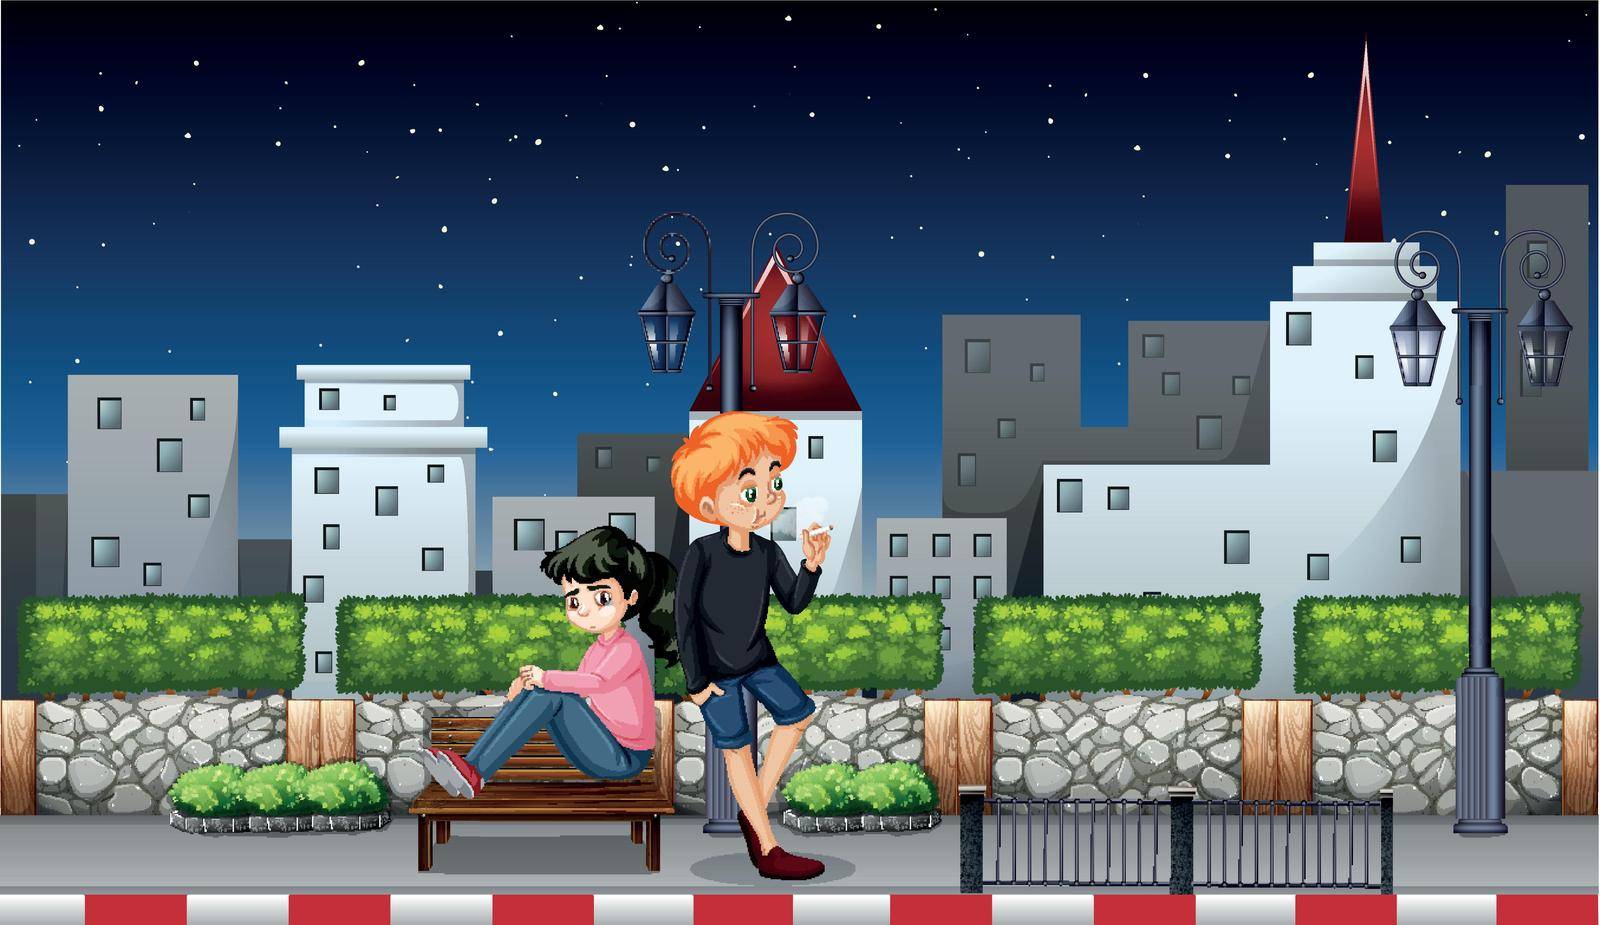 Young couple at night illustration